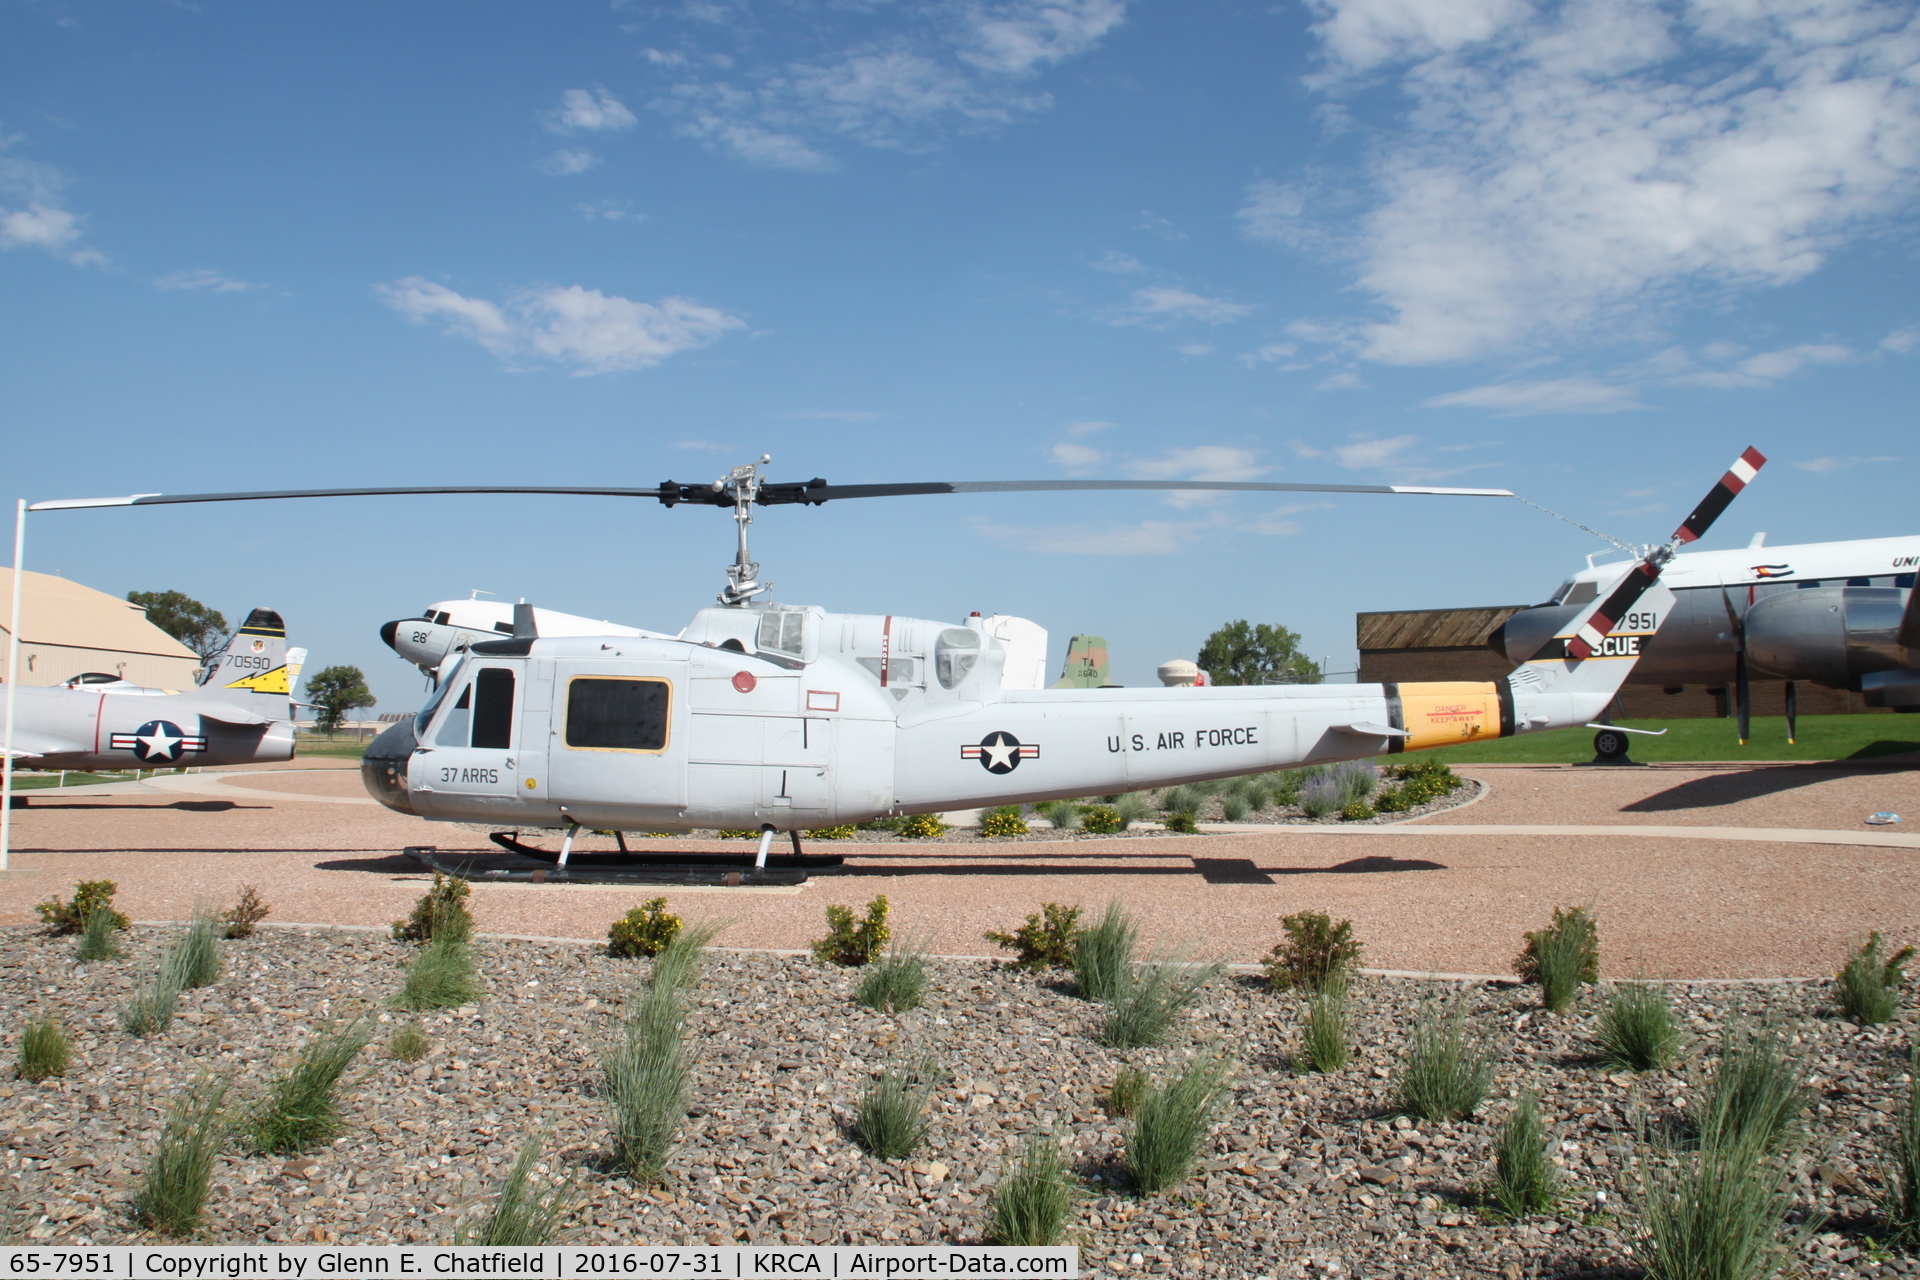 65-7951, 1965 Bell UH-1F Iroquois C/N 7092, At the South Dakota Air & Space Museum